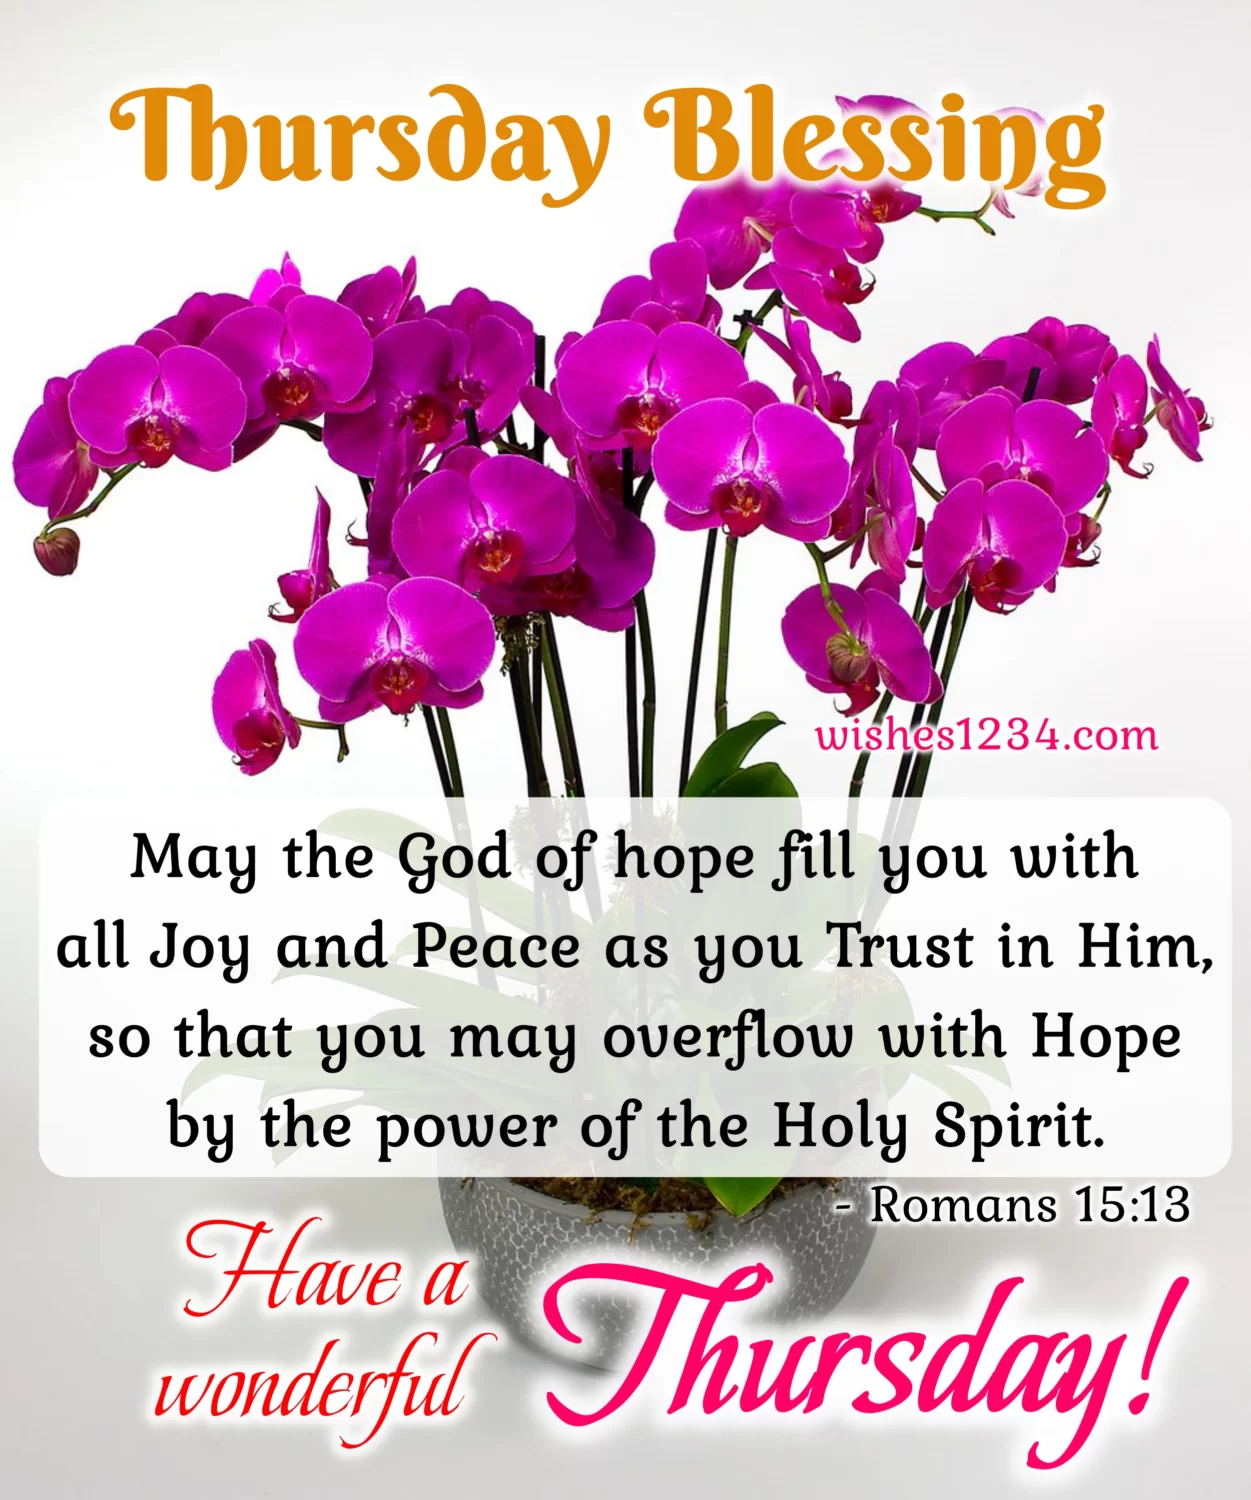 Thursday blessings with pink orchid flowers, Thursday Blessings.